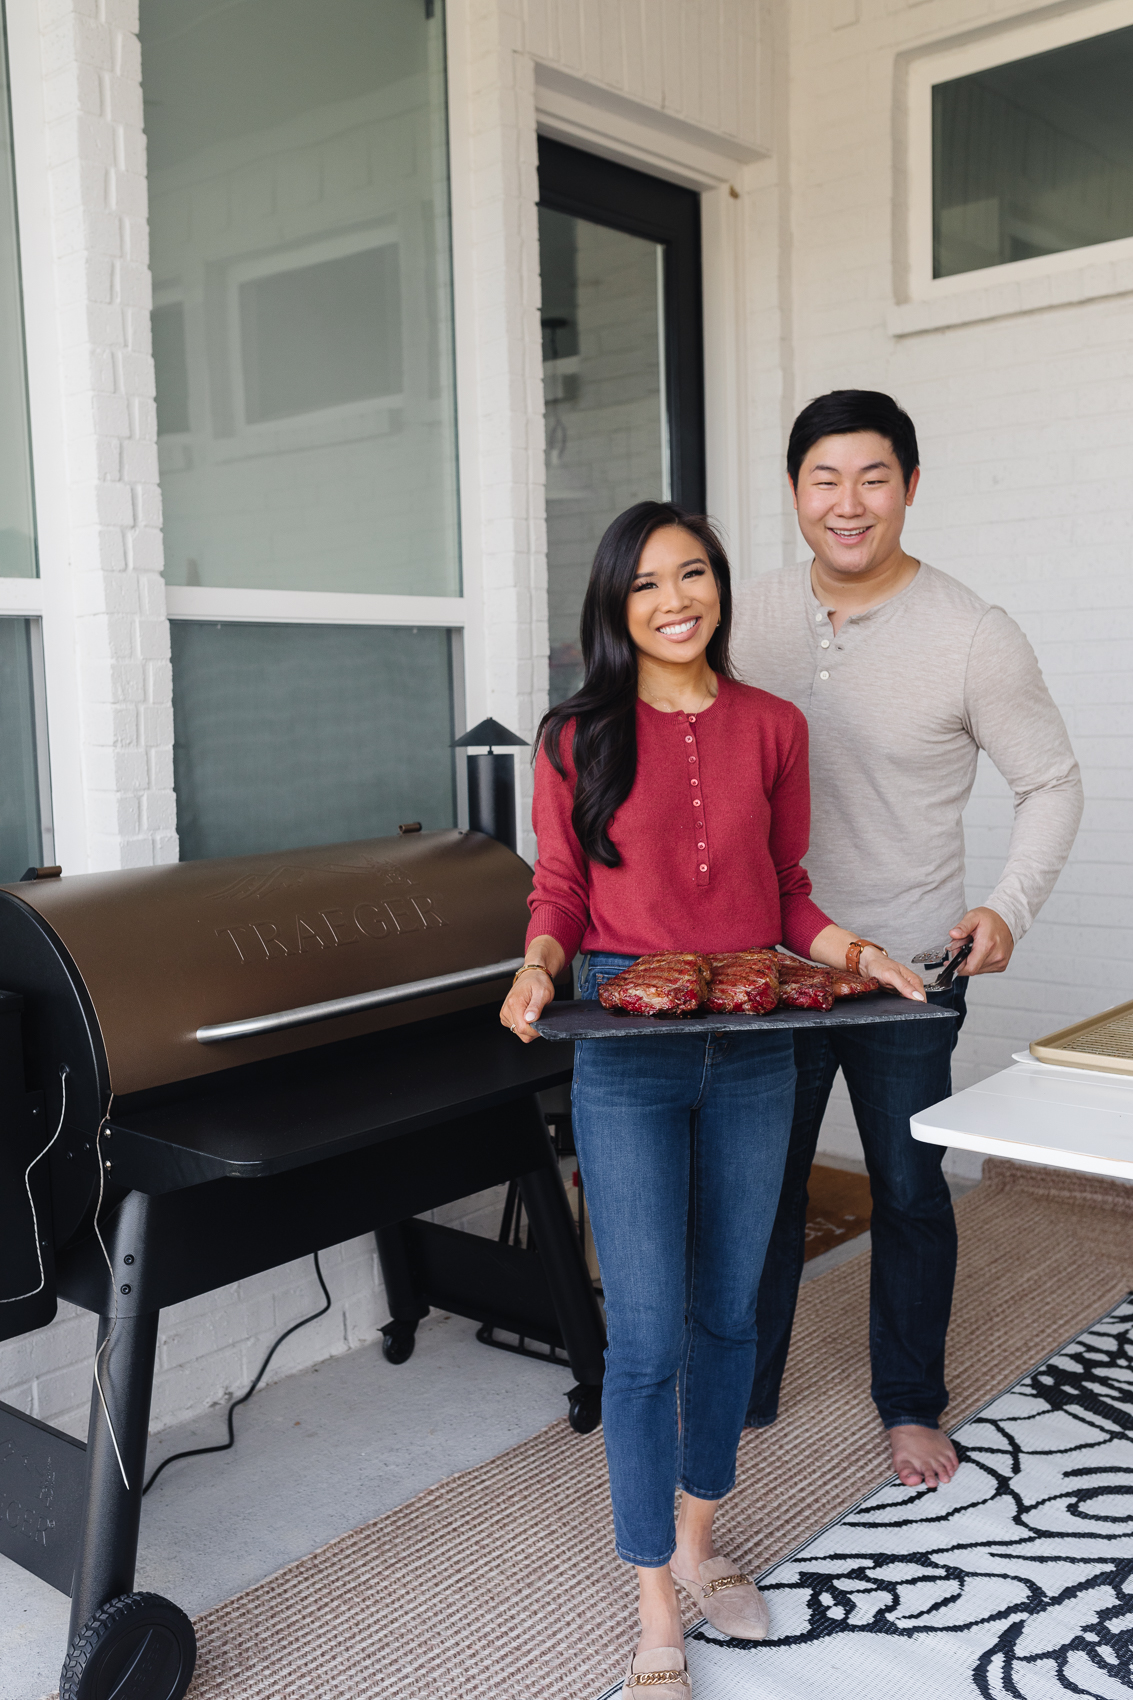 Blogger Hoang-Kim and her fiance Johnny on their backyard patio with the Traegar Pro 34